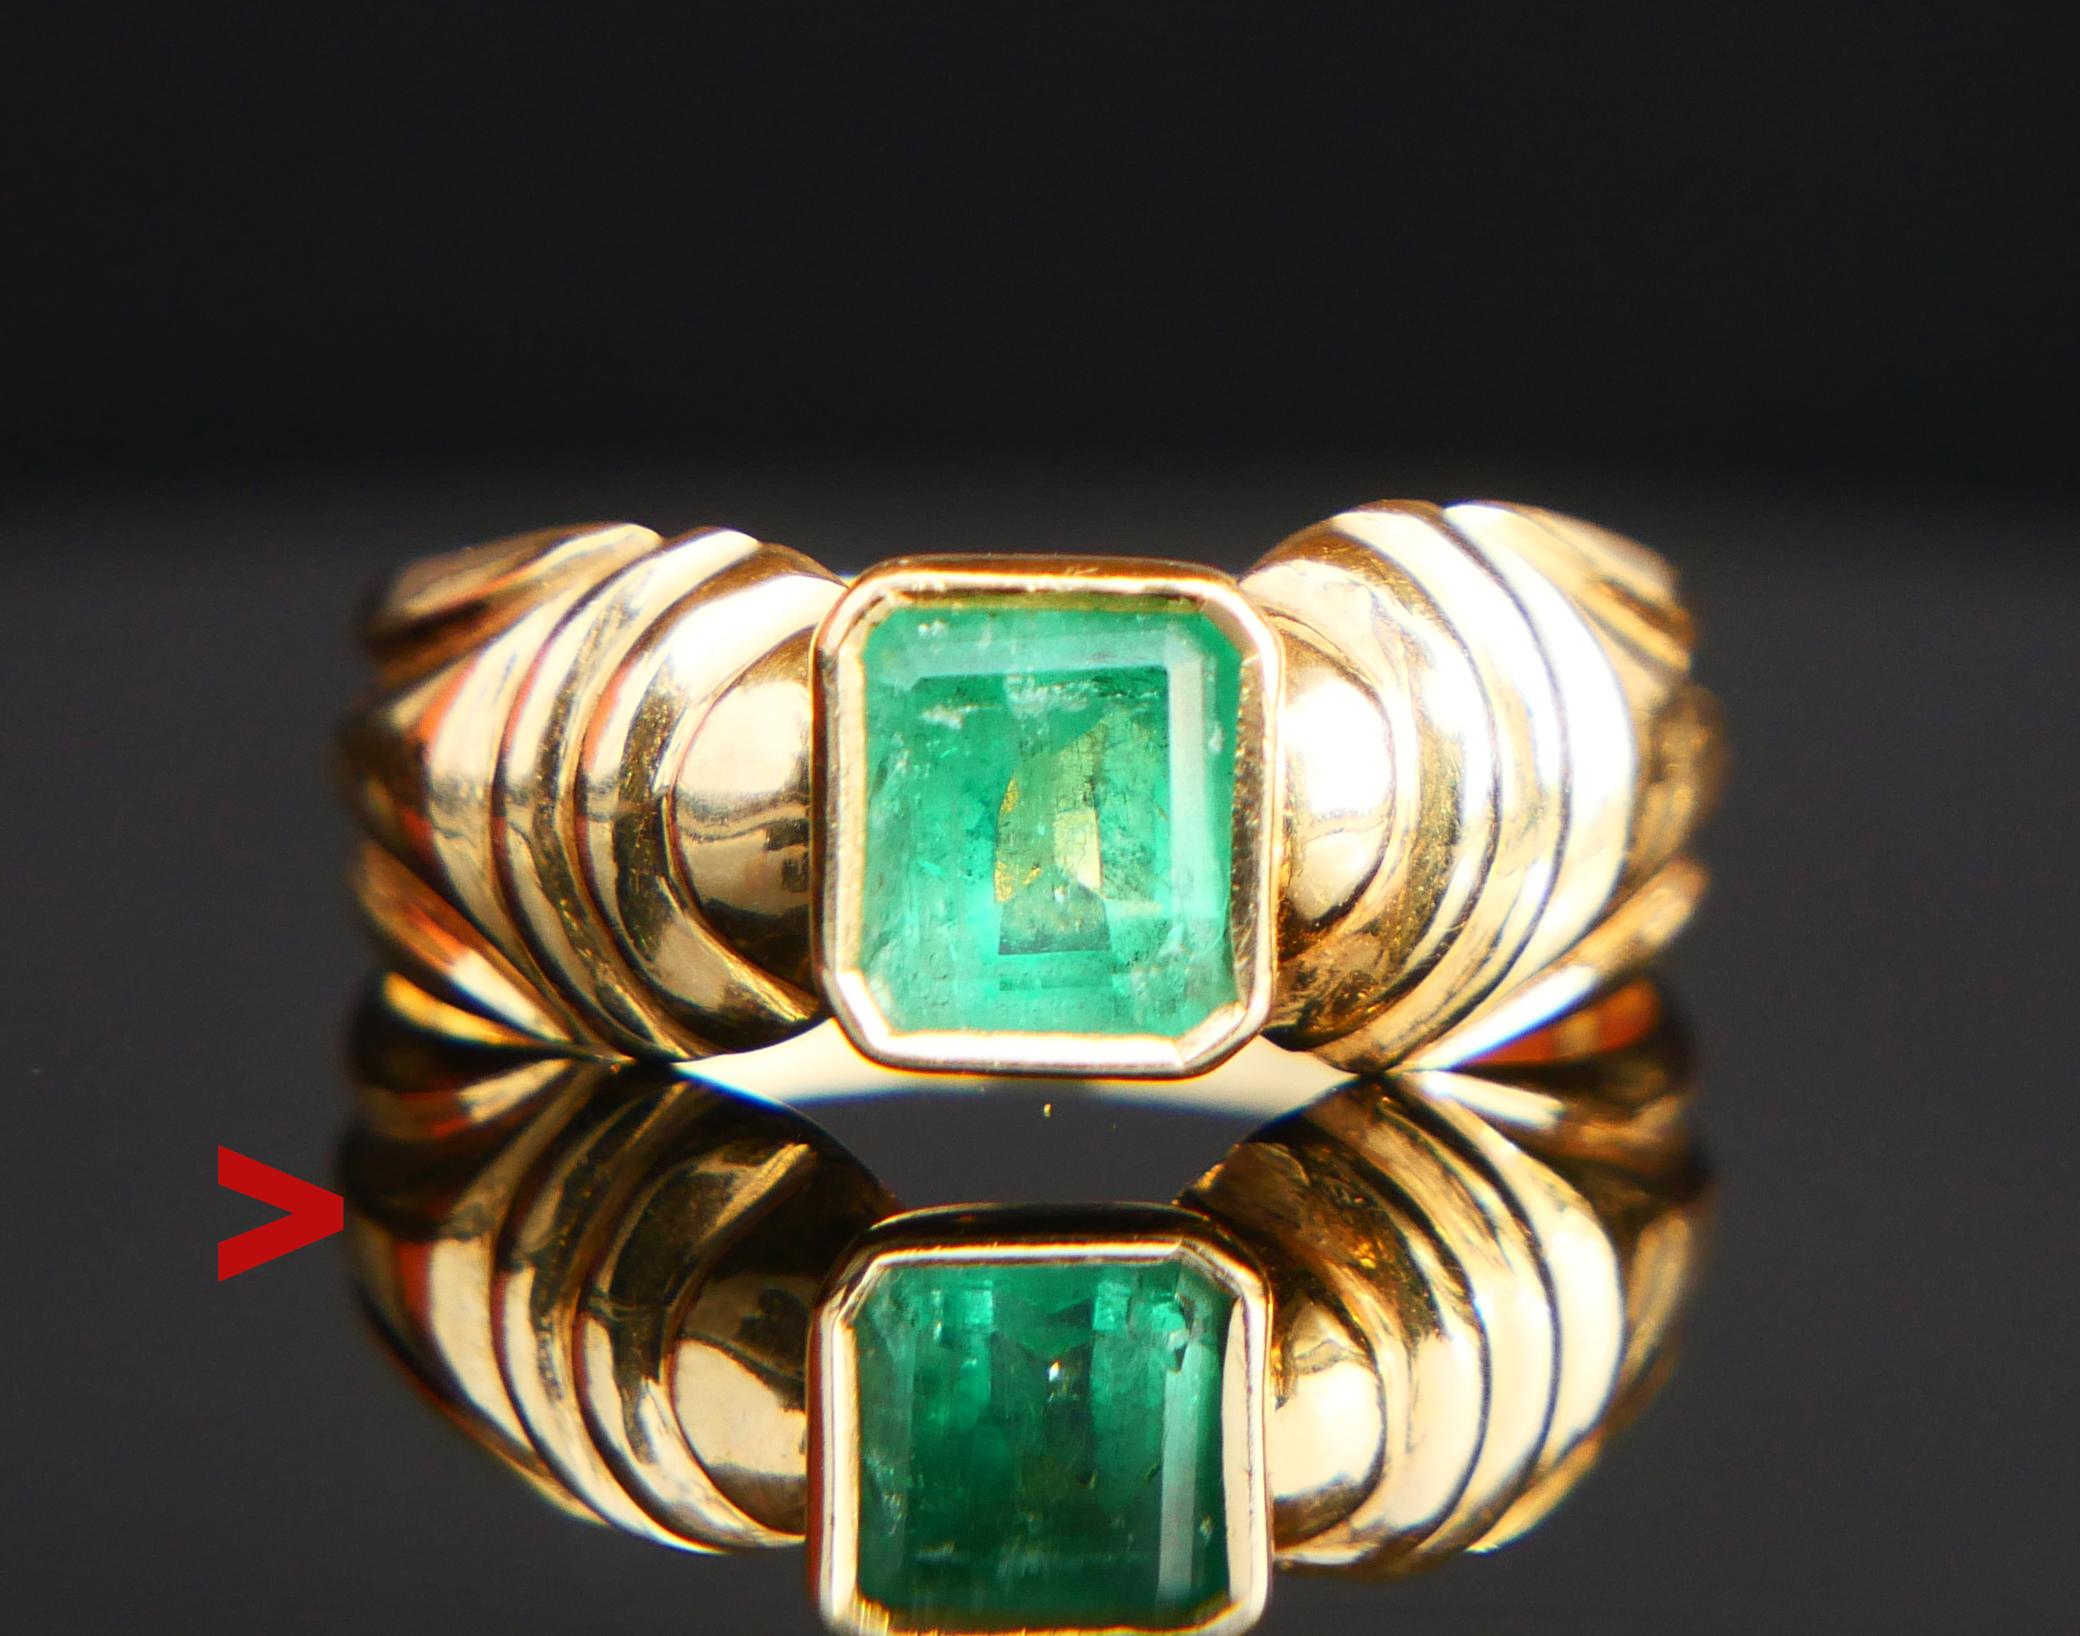 Elegant vintage Emerald Ring, the carved band in solid 18ct Yellow Gold + bezel set natural emerald cut Emerald stone of deep /strong Green color 6 mm x 5 mm x 3.75 mm deep / ca. 0.85 ct

Hallmarked 18K. Size: Ø 7US / 17.35 mm. Weight: 3.7